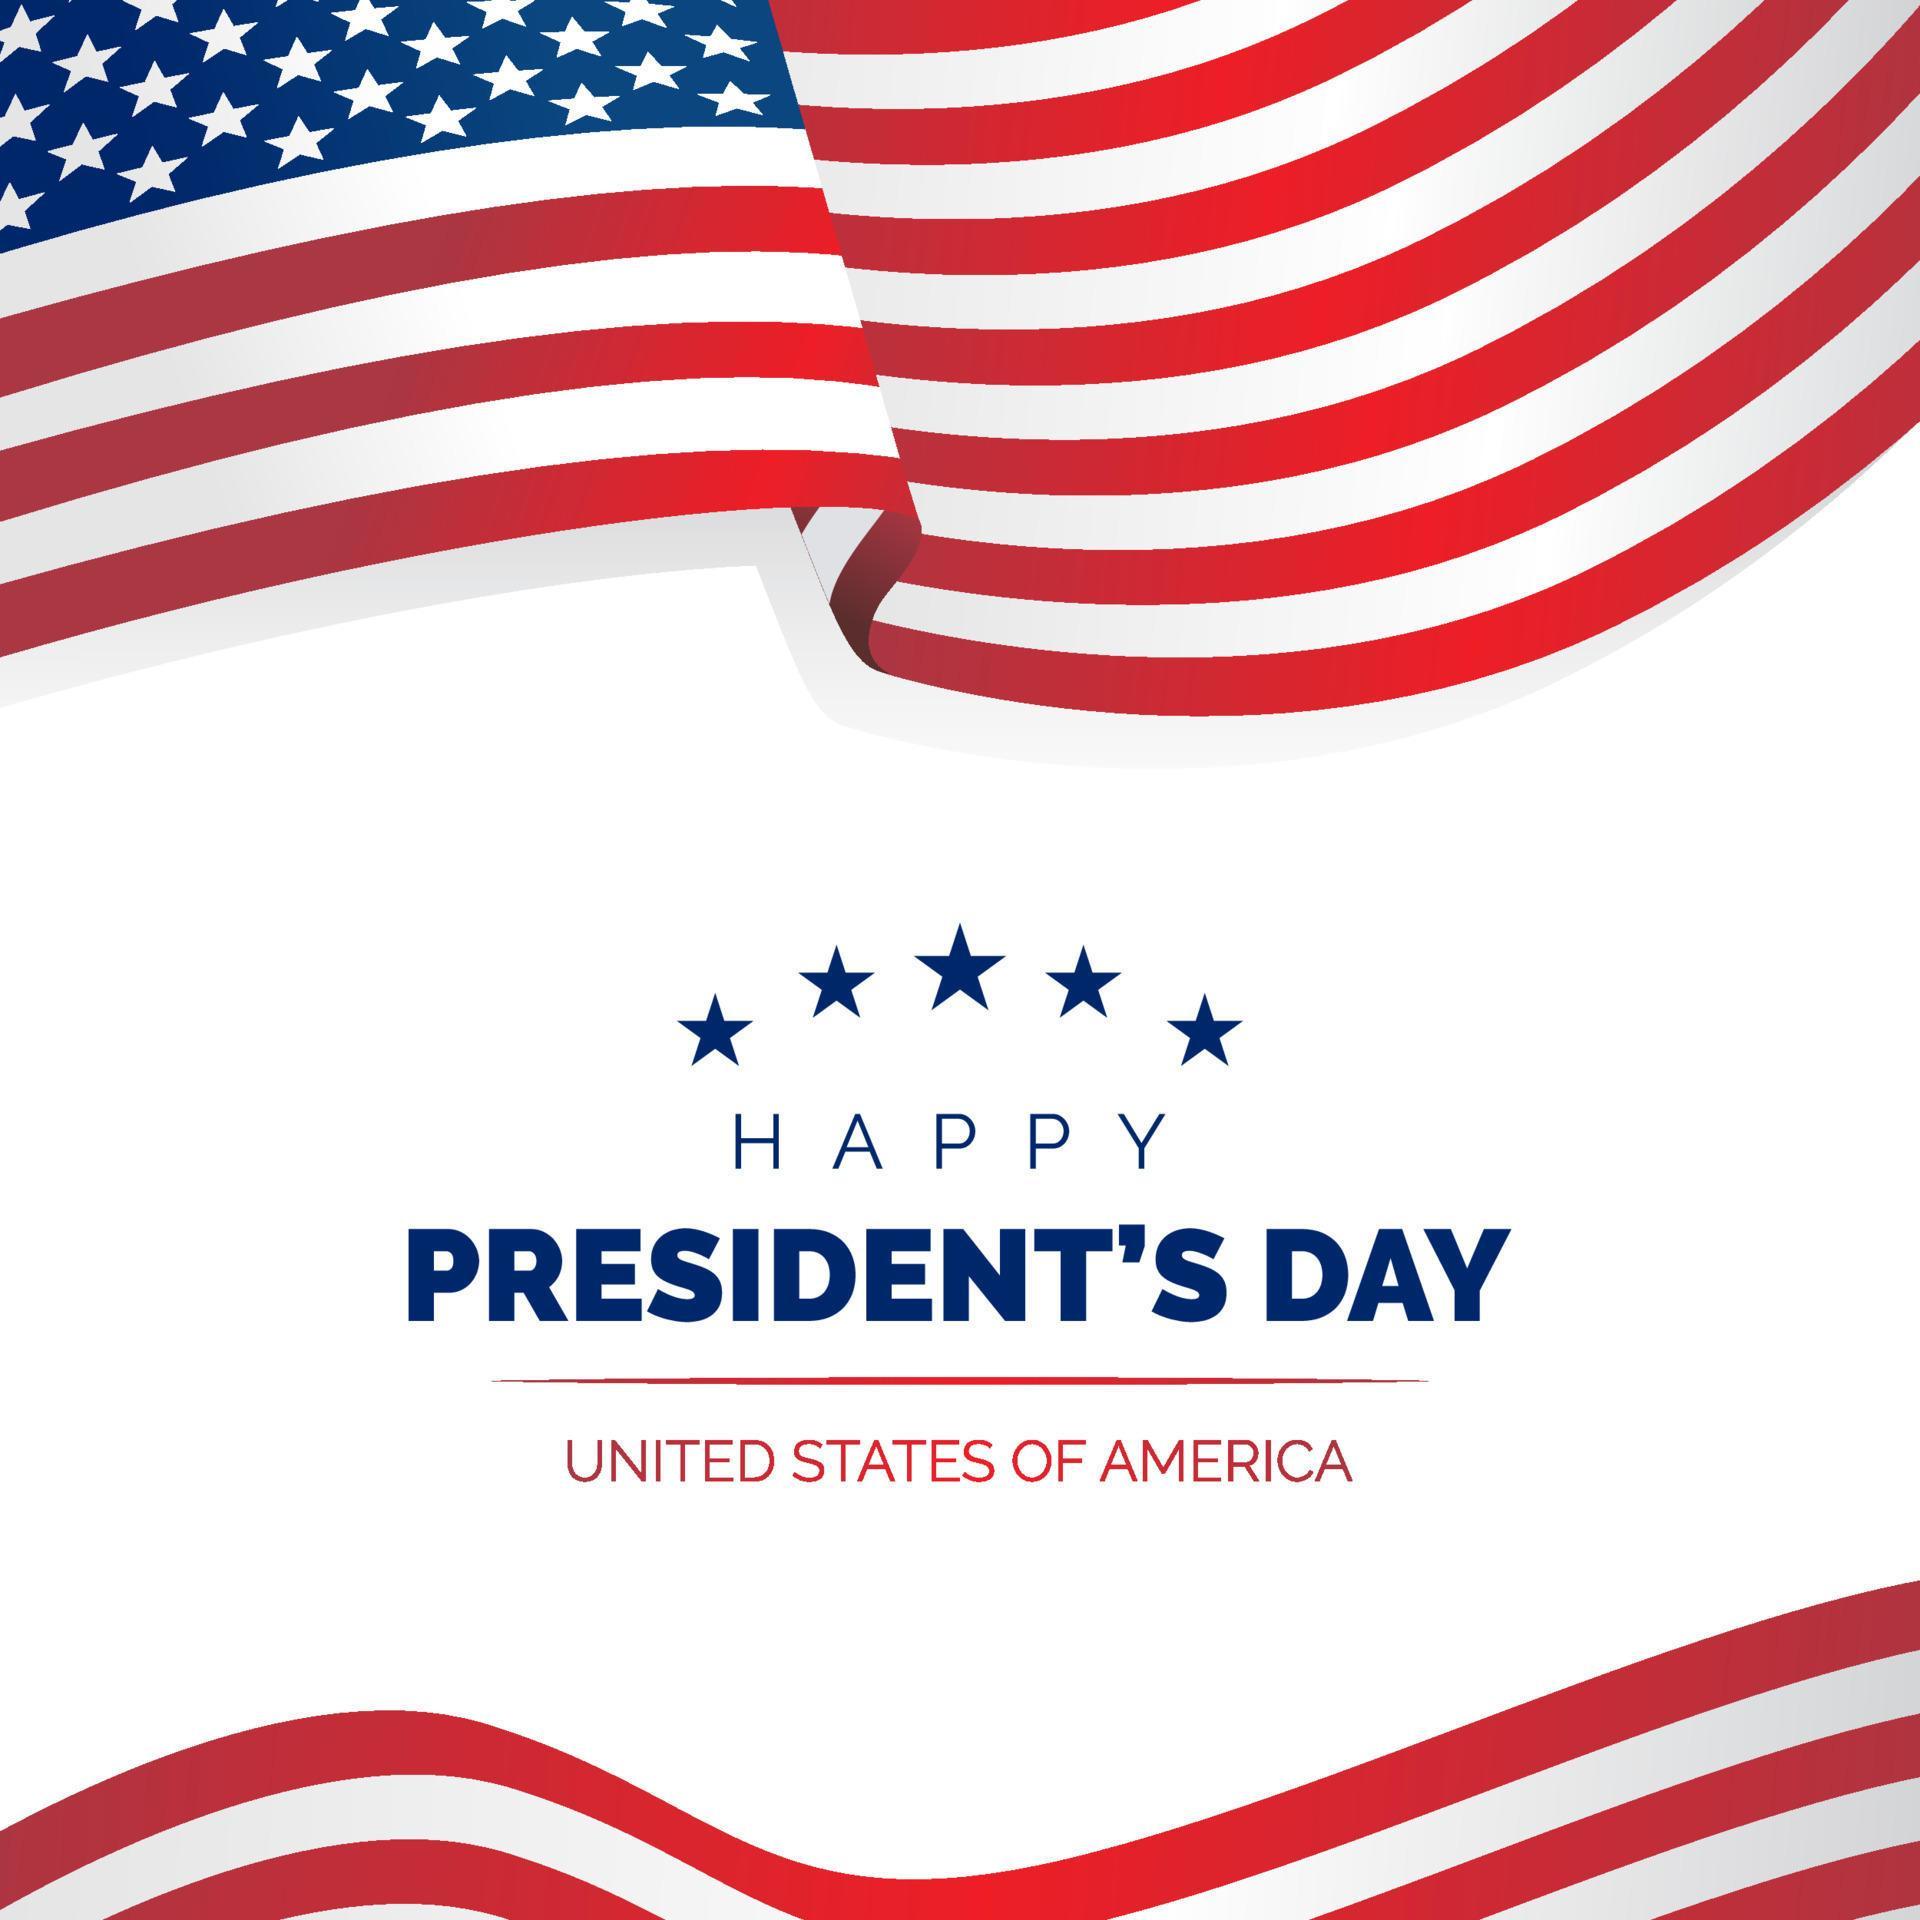 Happy Presidents Day In Usa Celebrate Design With Waving United States